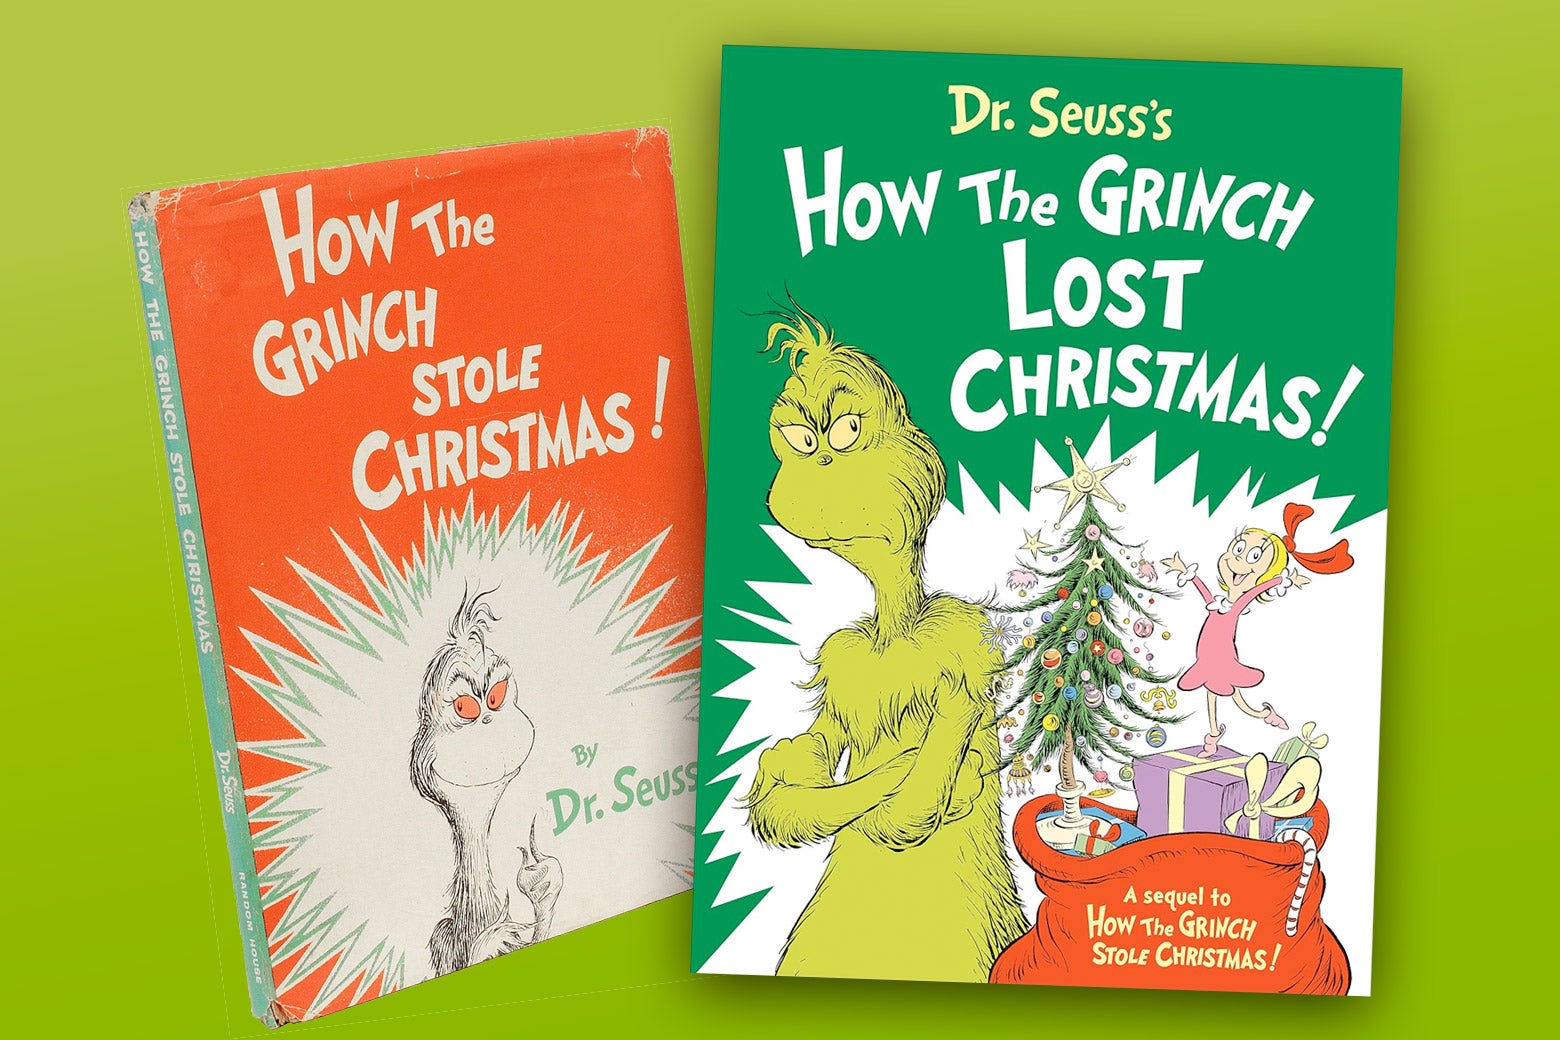 Dr. Seuss sequel book How the Grinch Lost Christmas, reviewed.